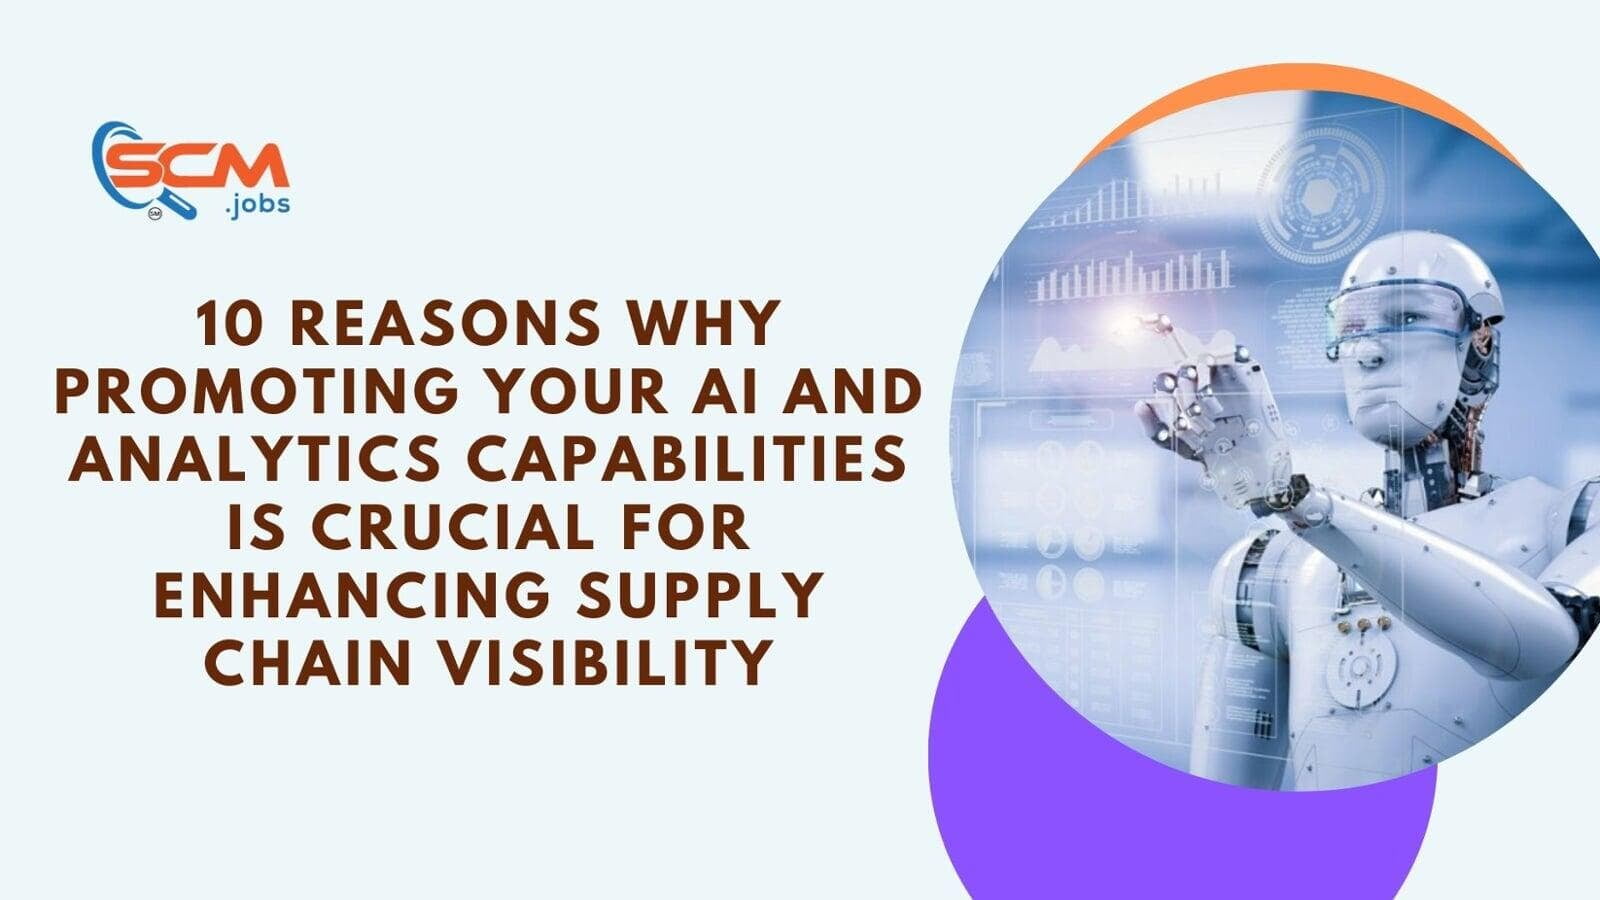 10 Reasons Why Promoting Your AI and Analytics Capabilities is Crucial for Enhancing Supply Chain Visibility